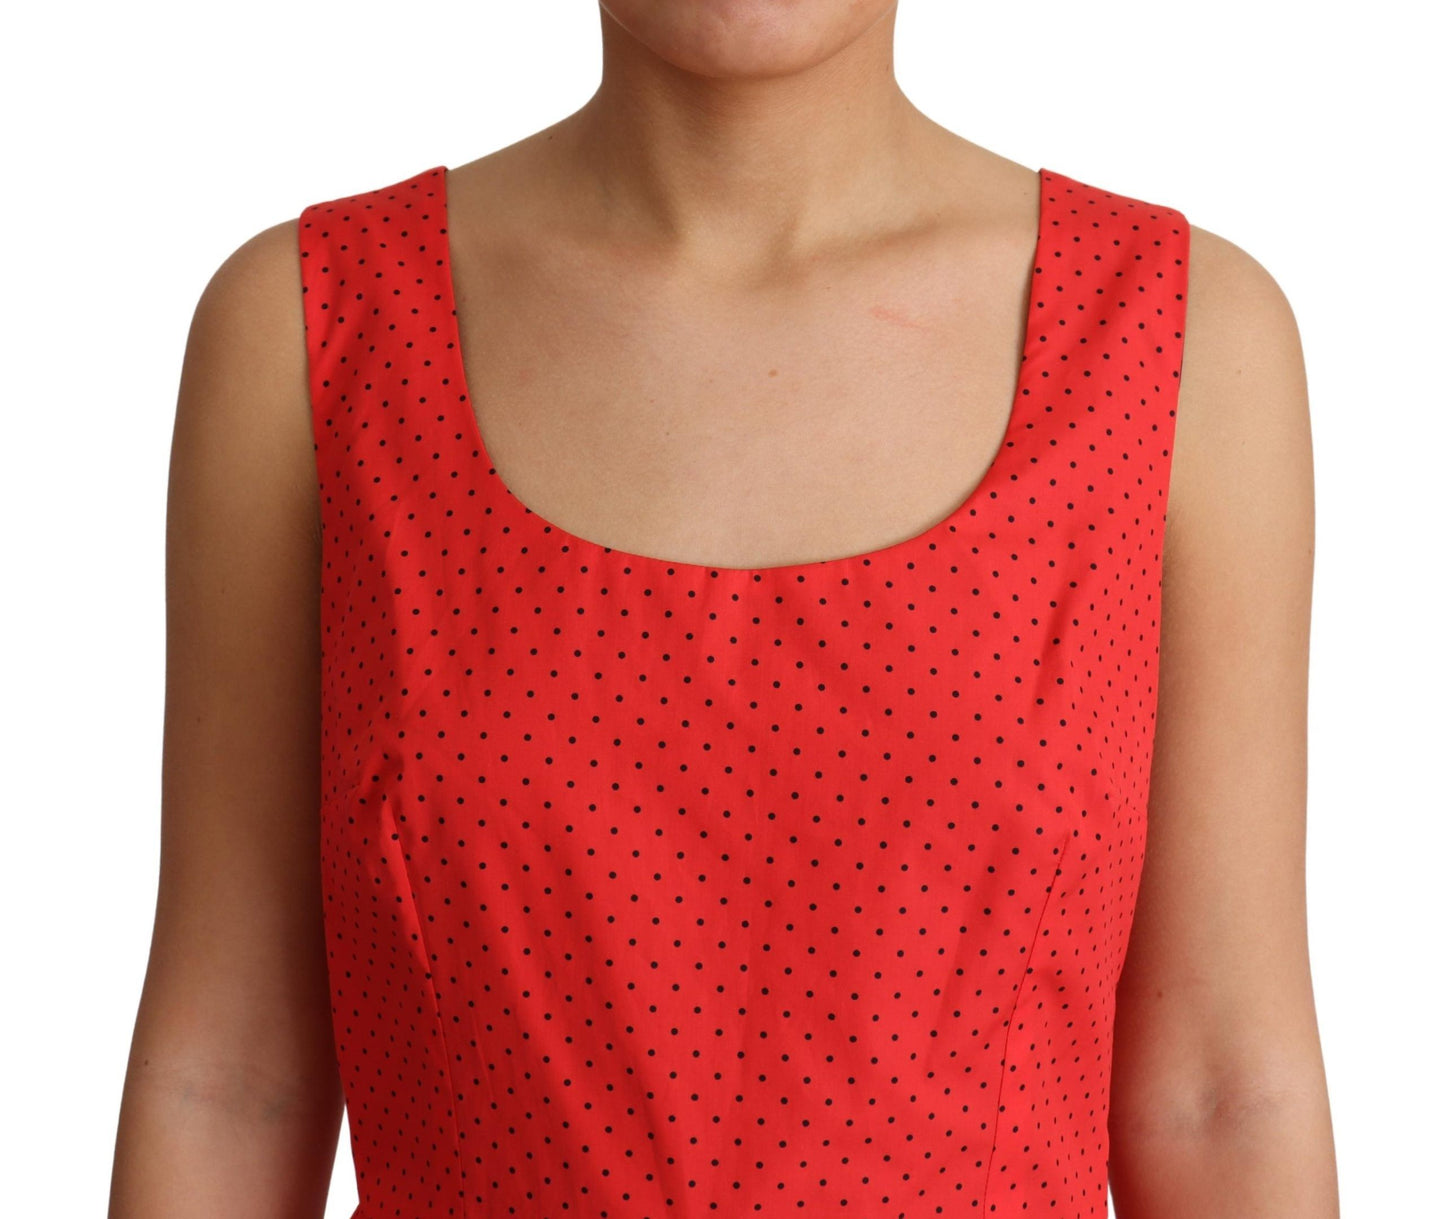 Dolce & Gabbana Red Polka Dotted Cotton A-Line  Dress